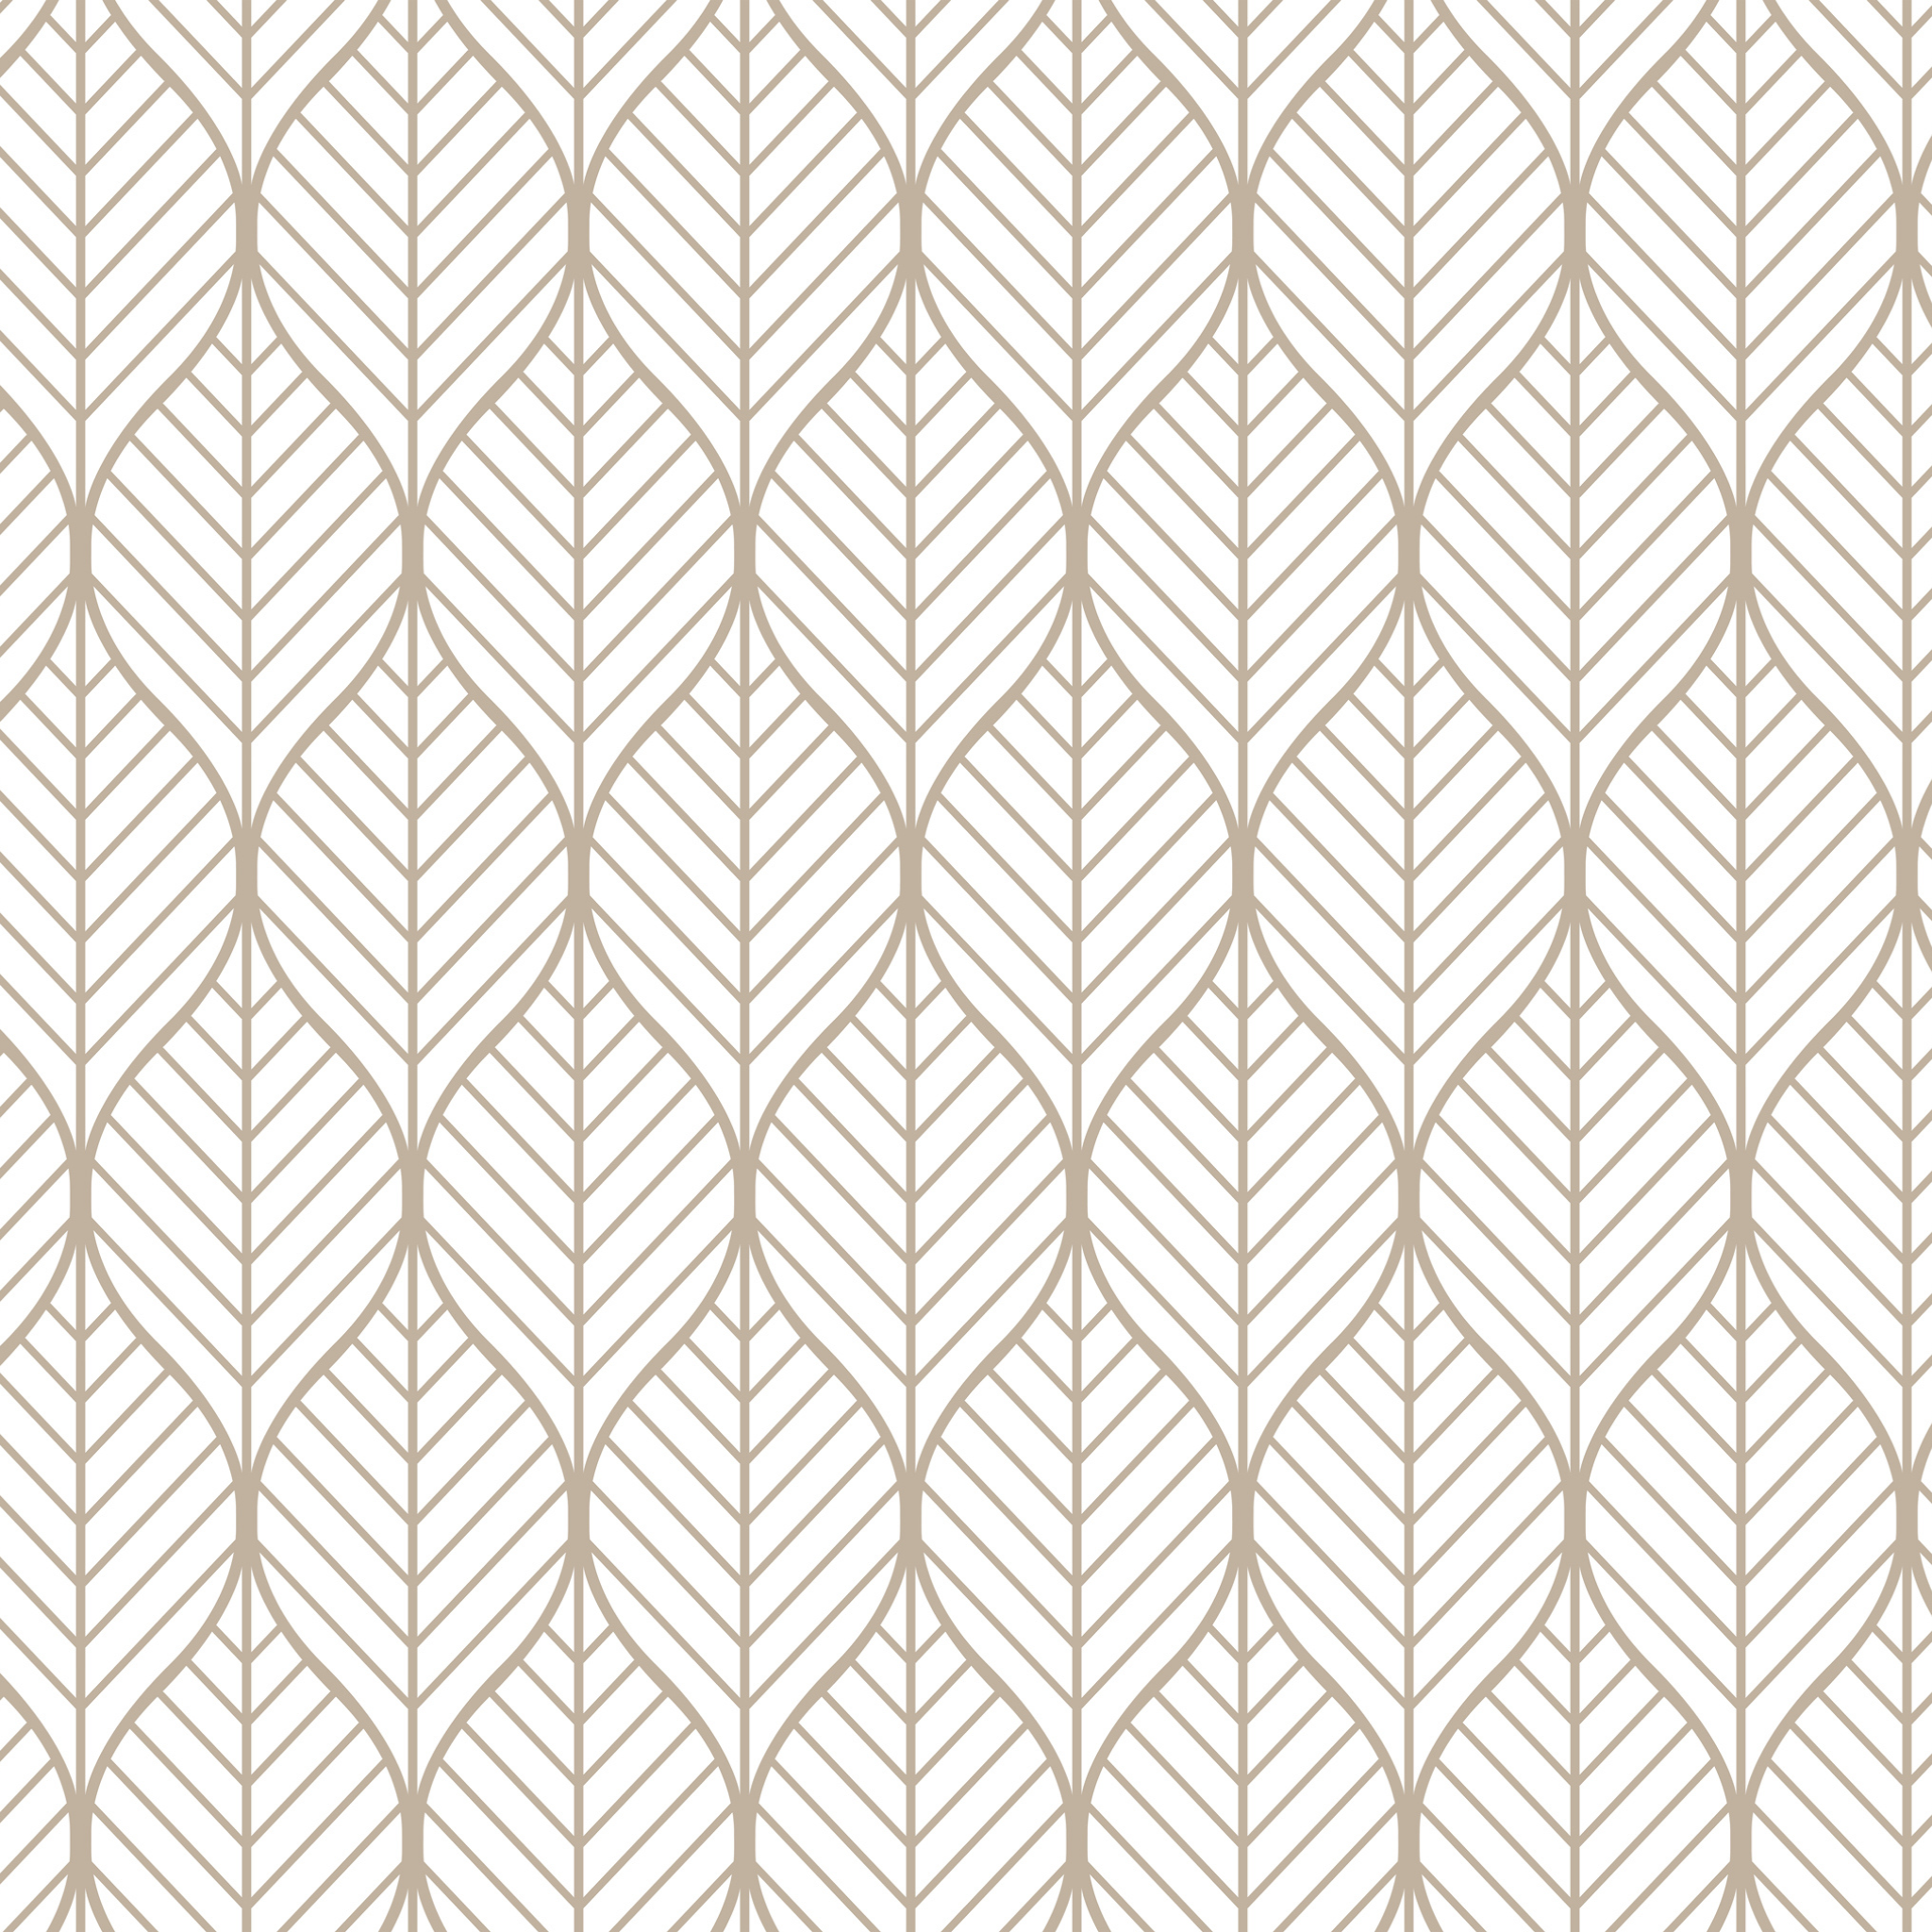 "Leaf patterned 'Don't Judge Me Wallpaper' by Wall Blush showcased in a stylish room setting, ideal focus for interior decor."